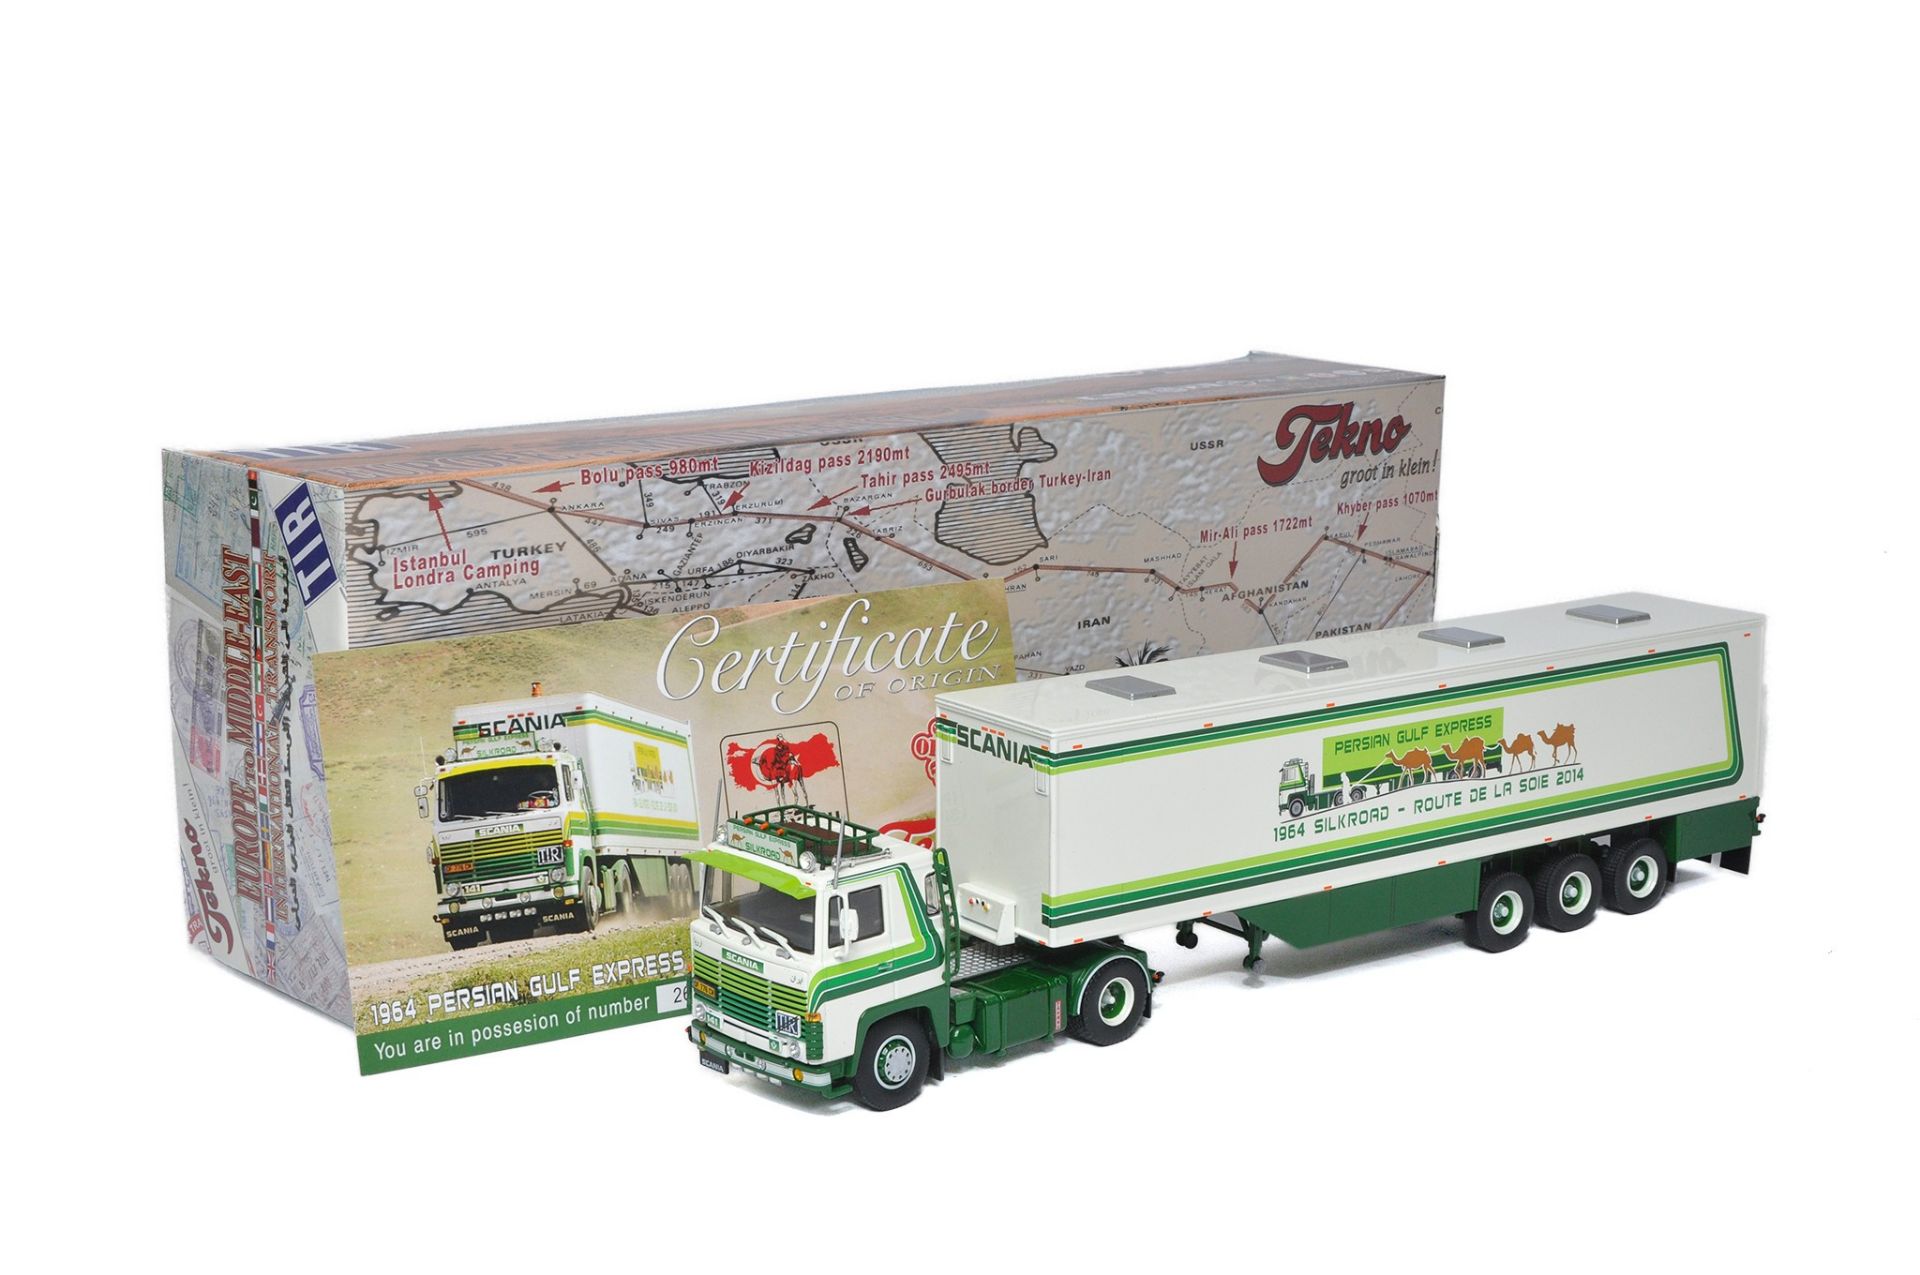 Tekno 1/50 diecast model truck issue comprising Scania Semi-Trailer in the livery of Persian Gulf